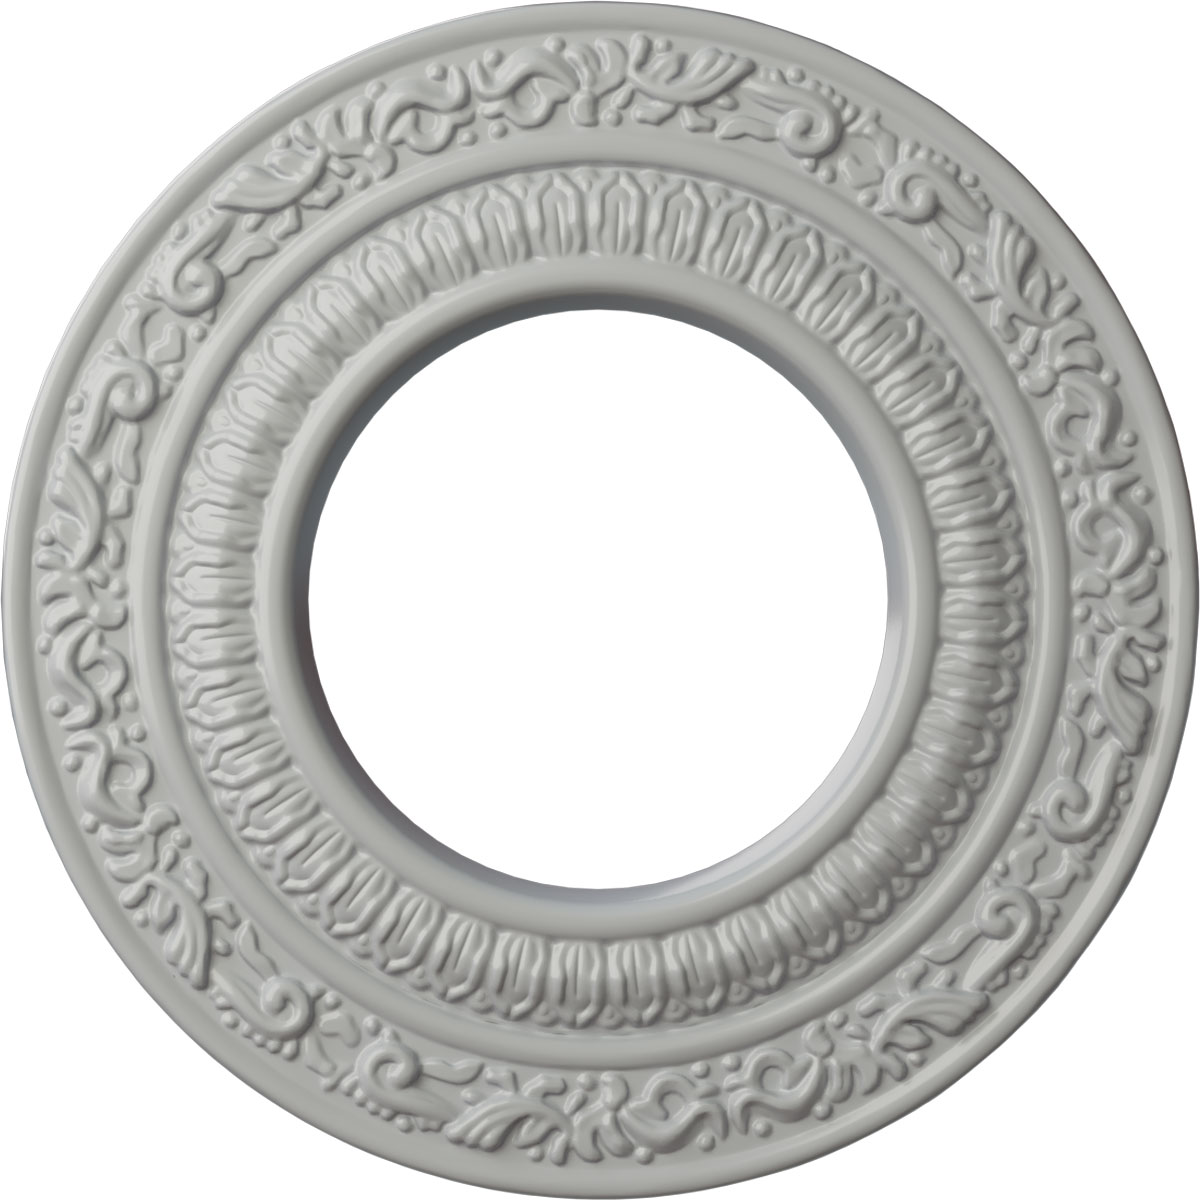 Ekena Millwork 8 1/8"OD x 4 1/8"ID x 1/2"P Andrea Ceiling Medallion (Fits Canopies up to 4 1/8"), Hand-Painted Frost - image 1 of 4